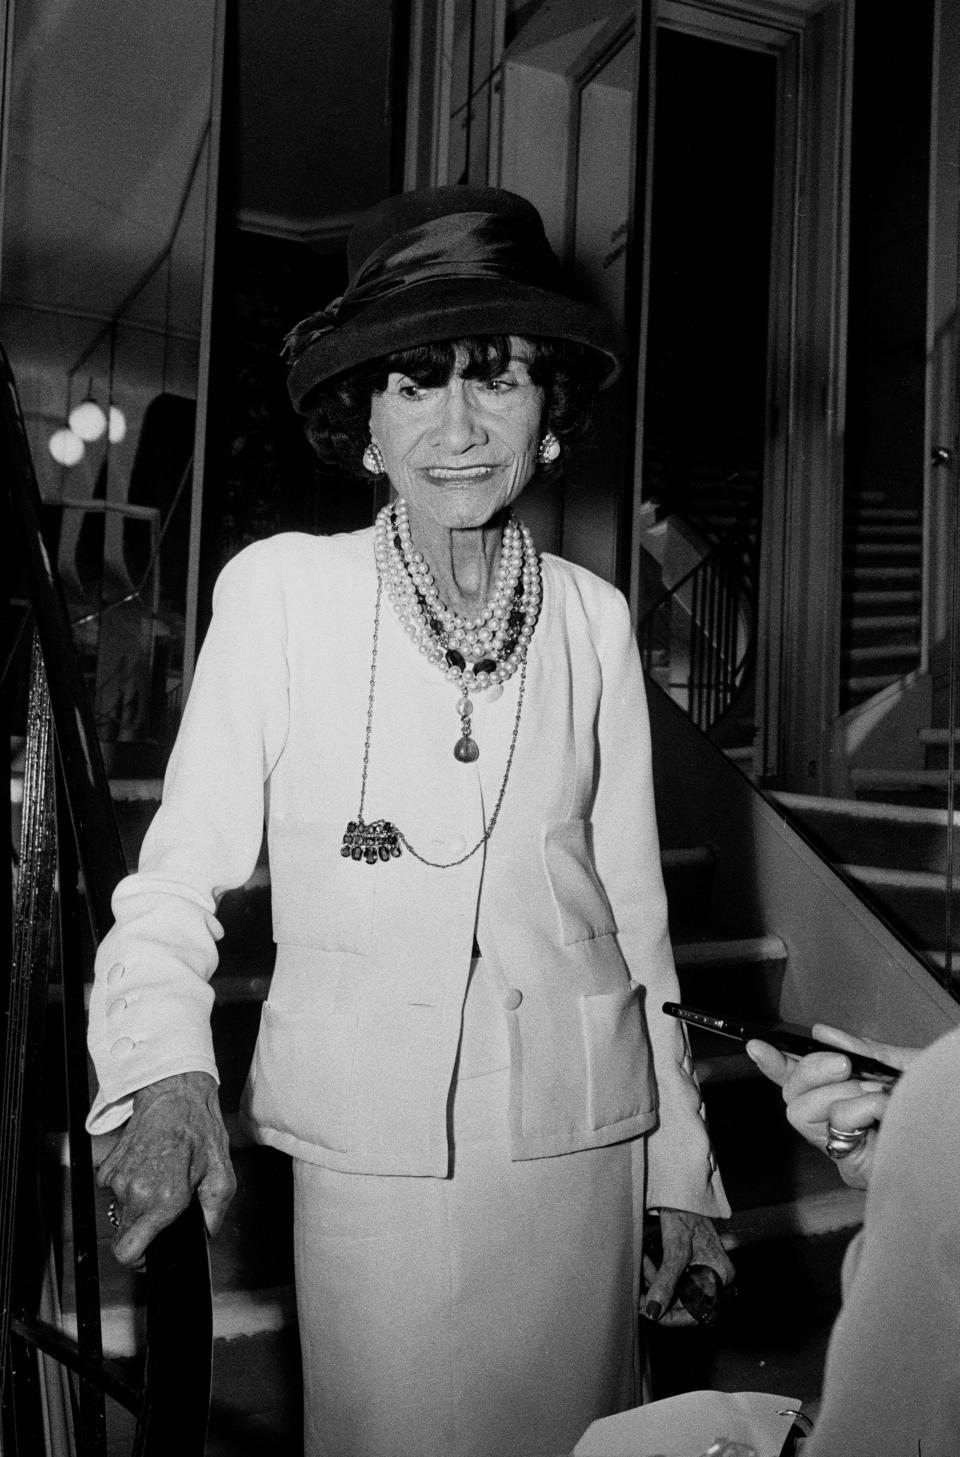 Coco Chanel photographed at her home in 1969.